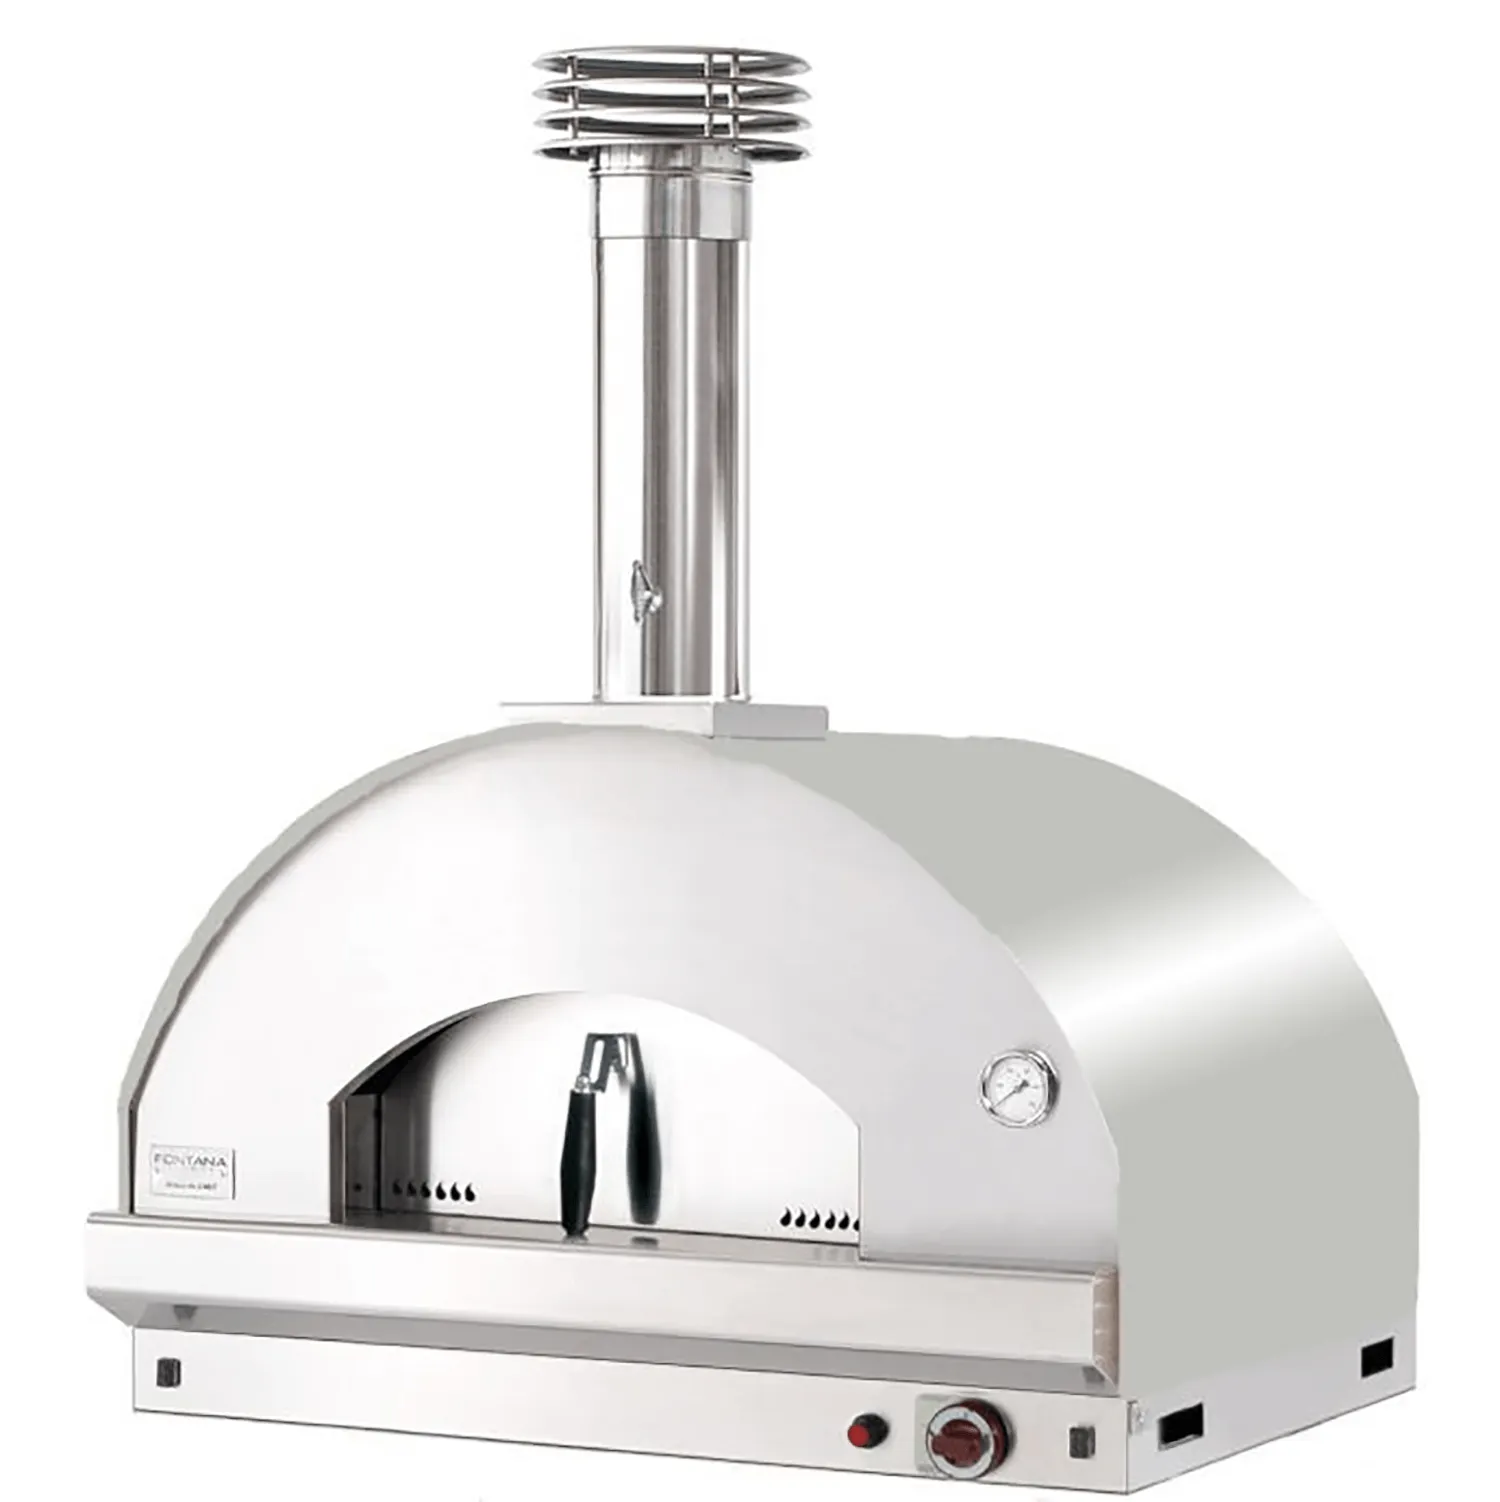 Fontana Mangiafuoco Outdoor Stainless Wood Fired Pizza Oven